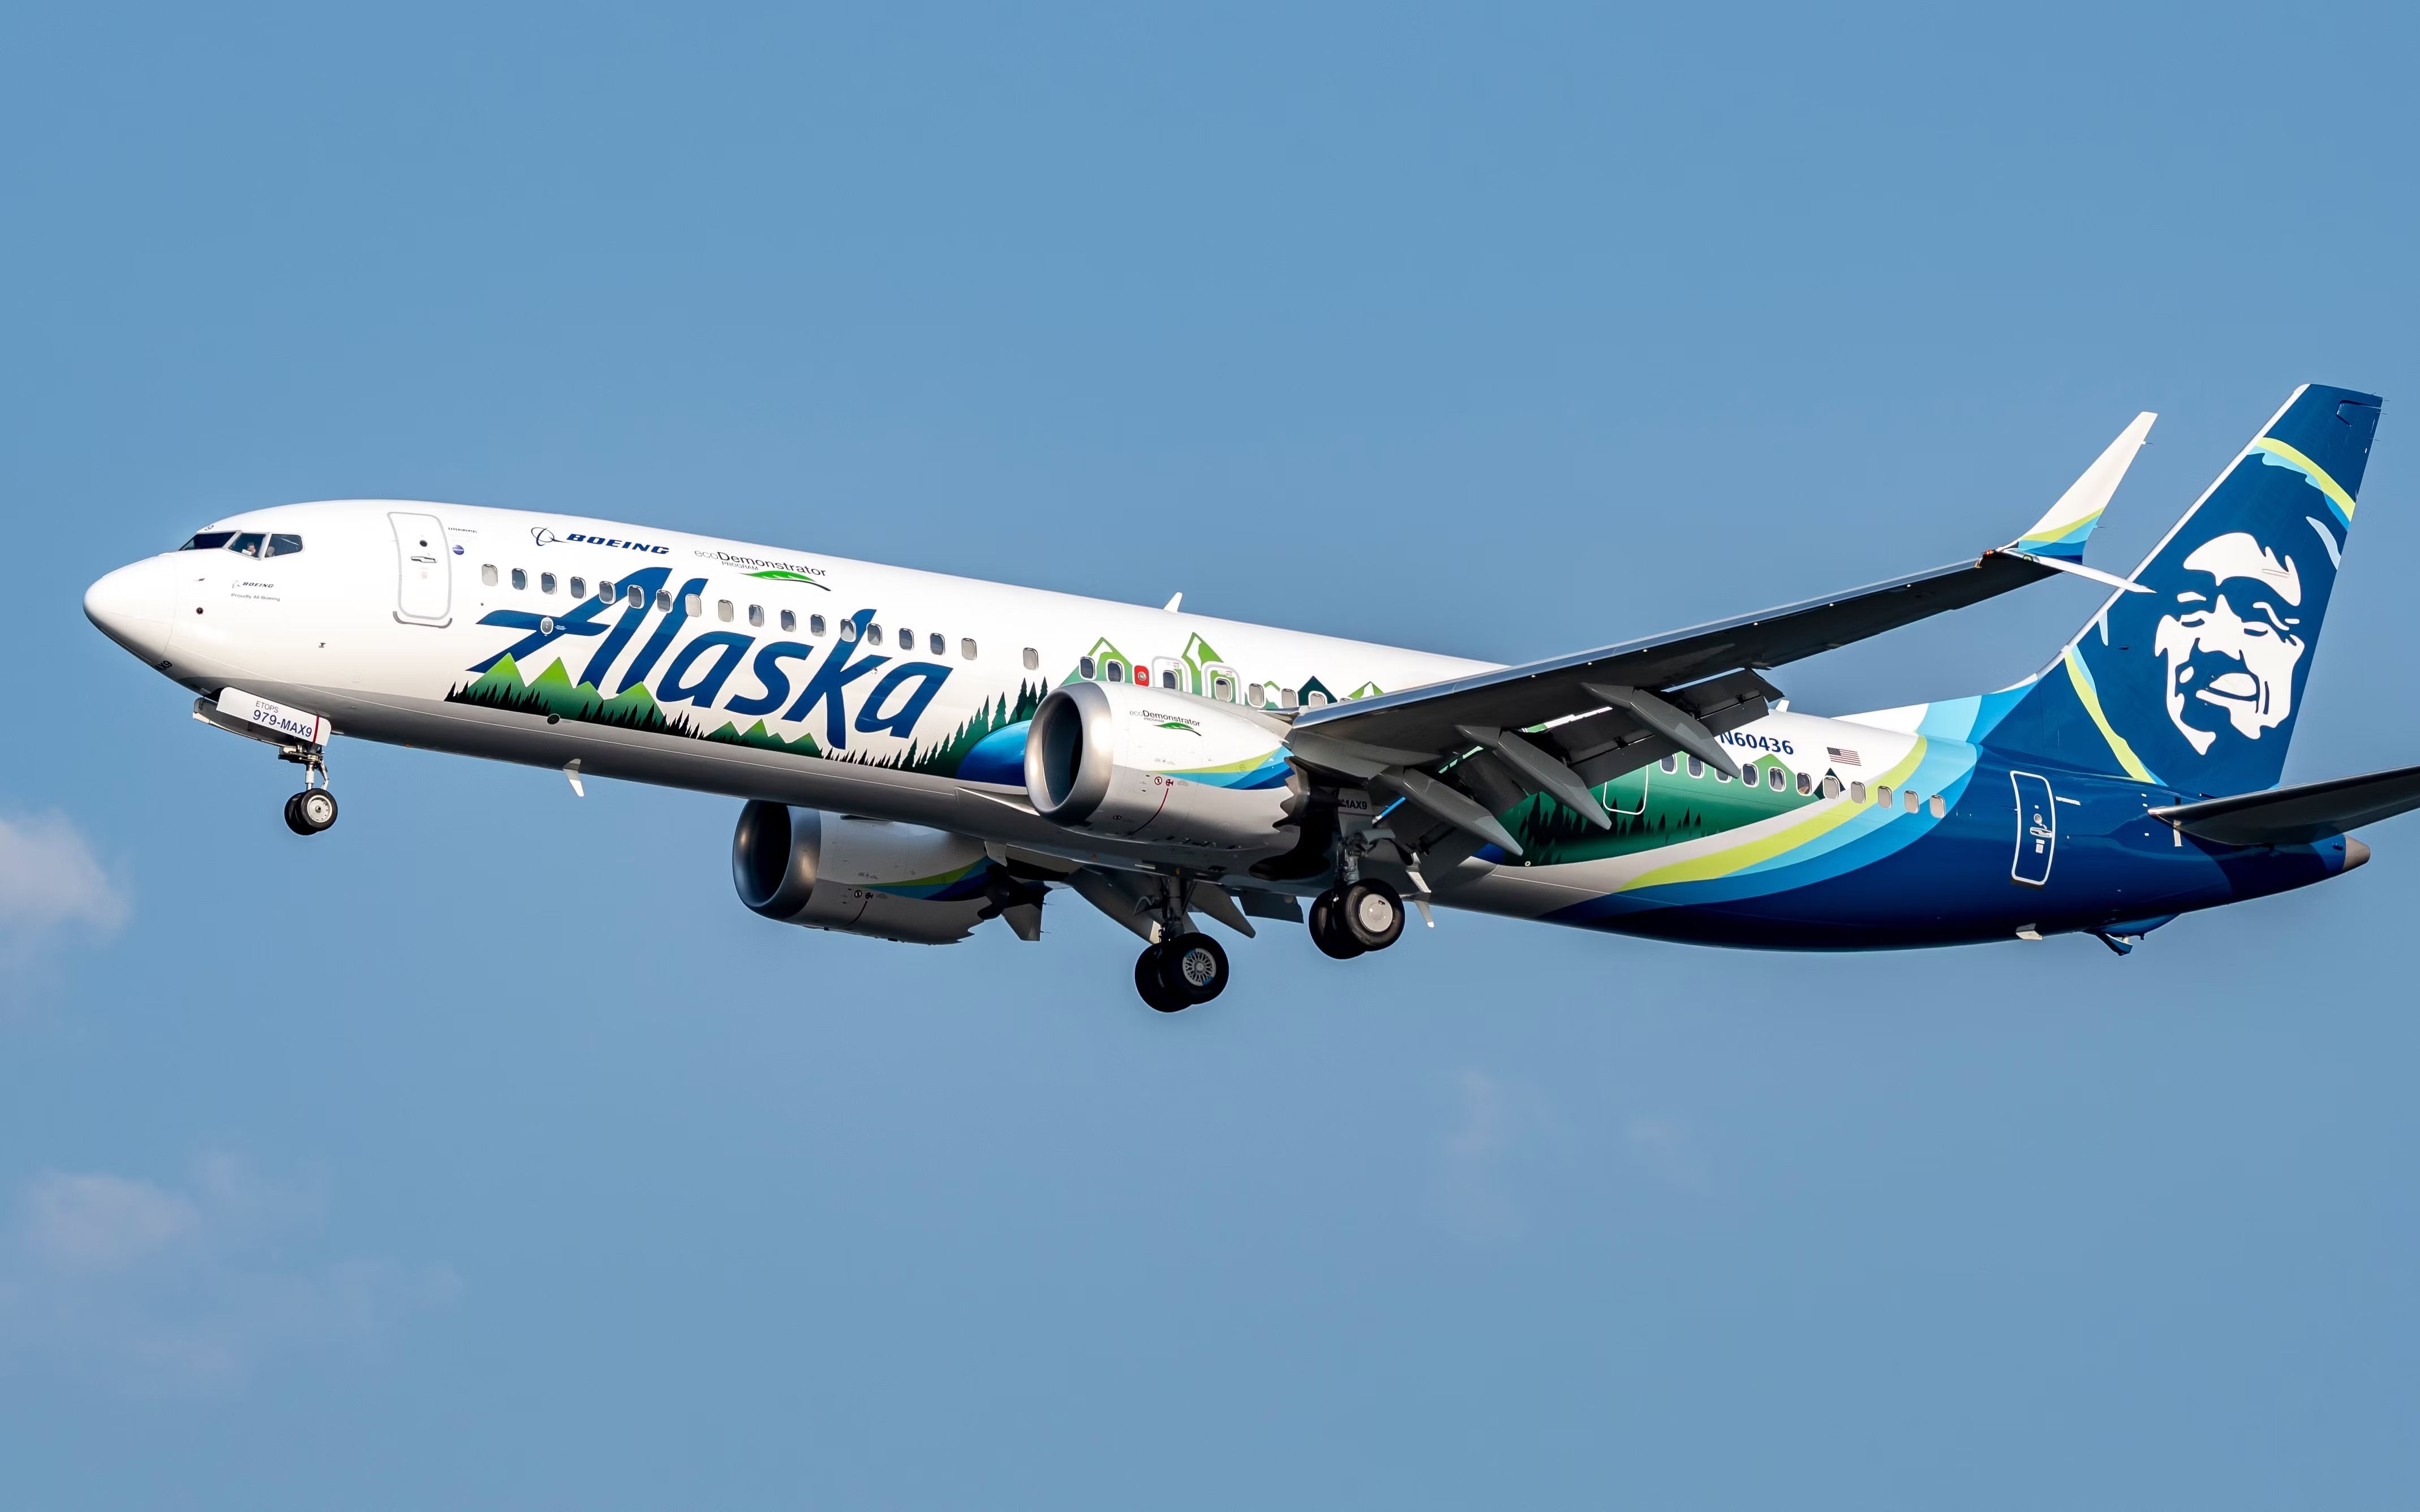 An Alaska Airlines Boeing 737 MAX 9 aircraft Andrew Mauro-2